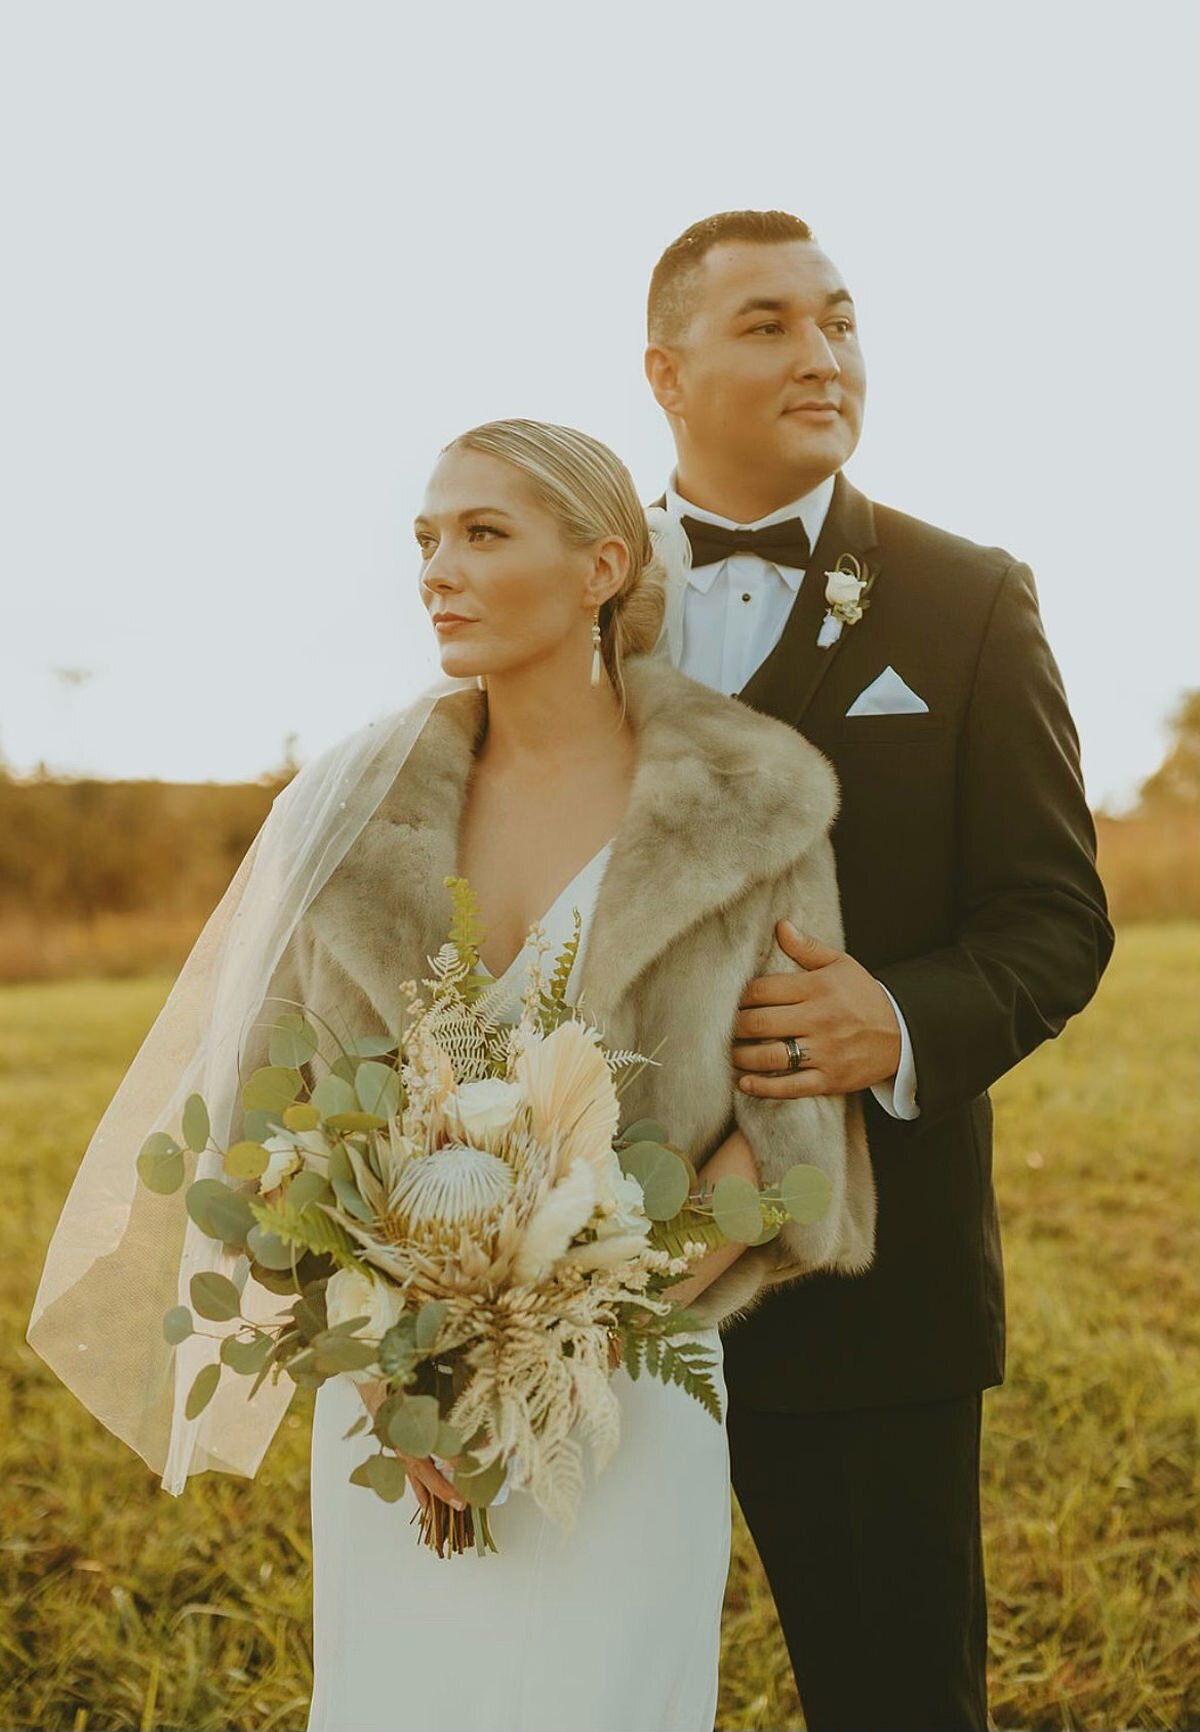 Groom wearing classic tux and bride with boho style together during golden hour